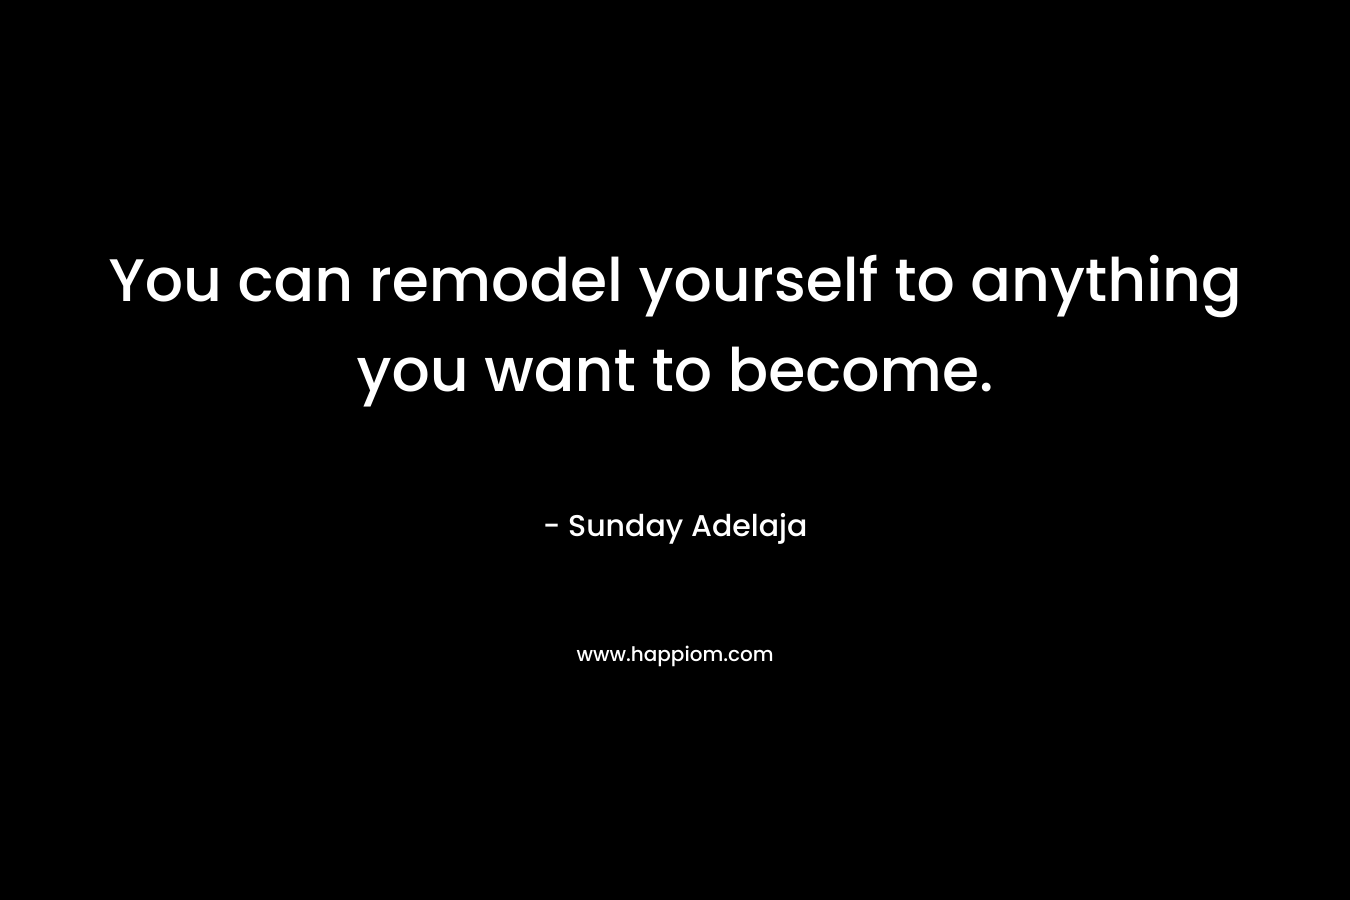 You can remodel yourself to anything you want to become.